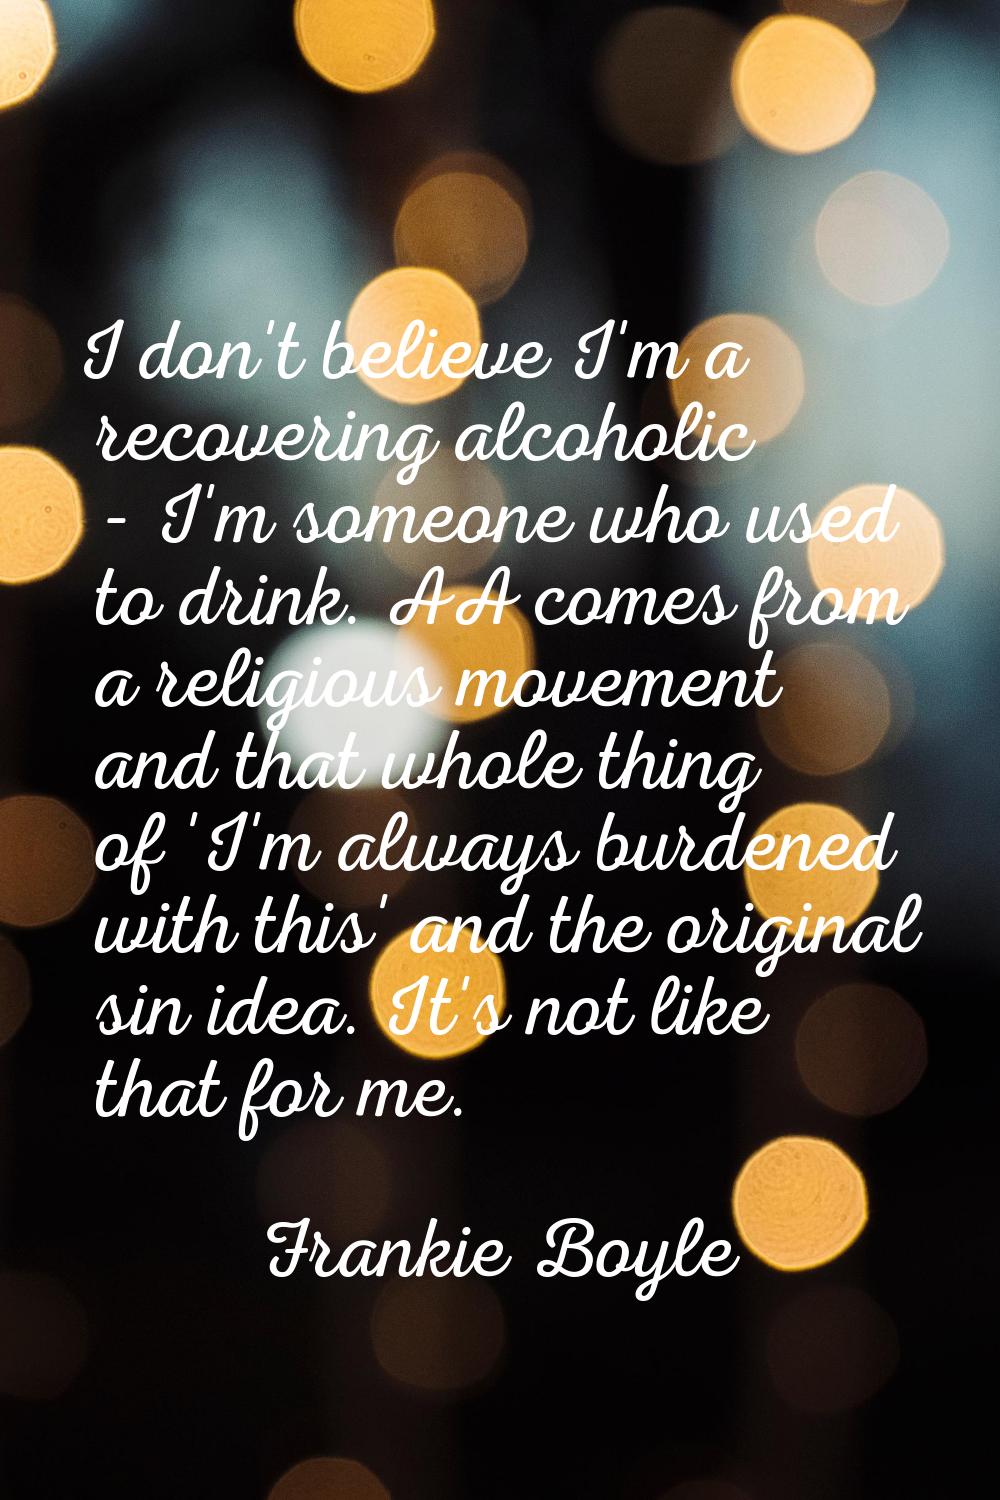 I don't believe I'm a recovering alcoholic - I'm someone who used to drink. AA comes from a religio